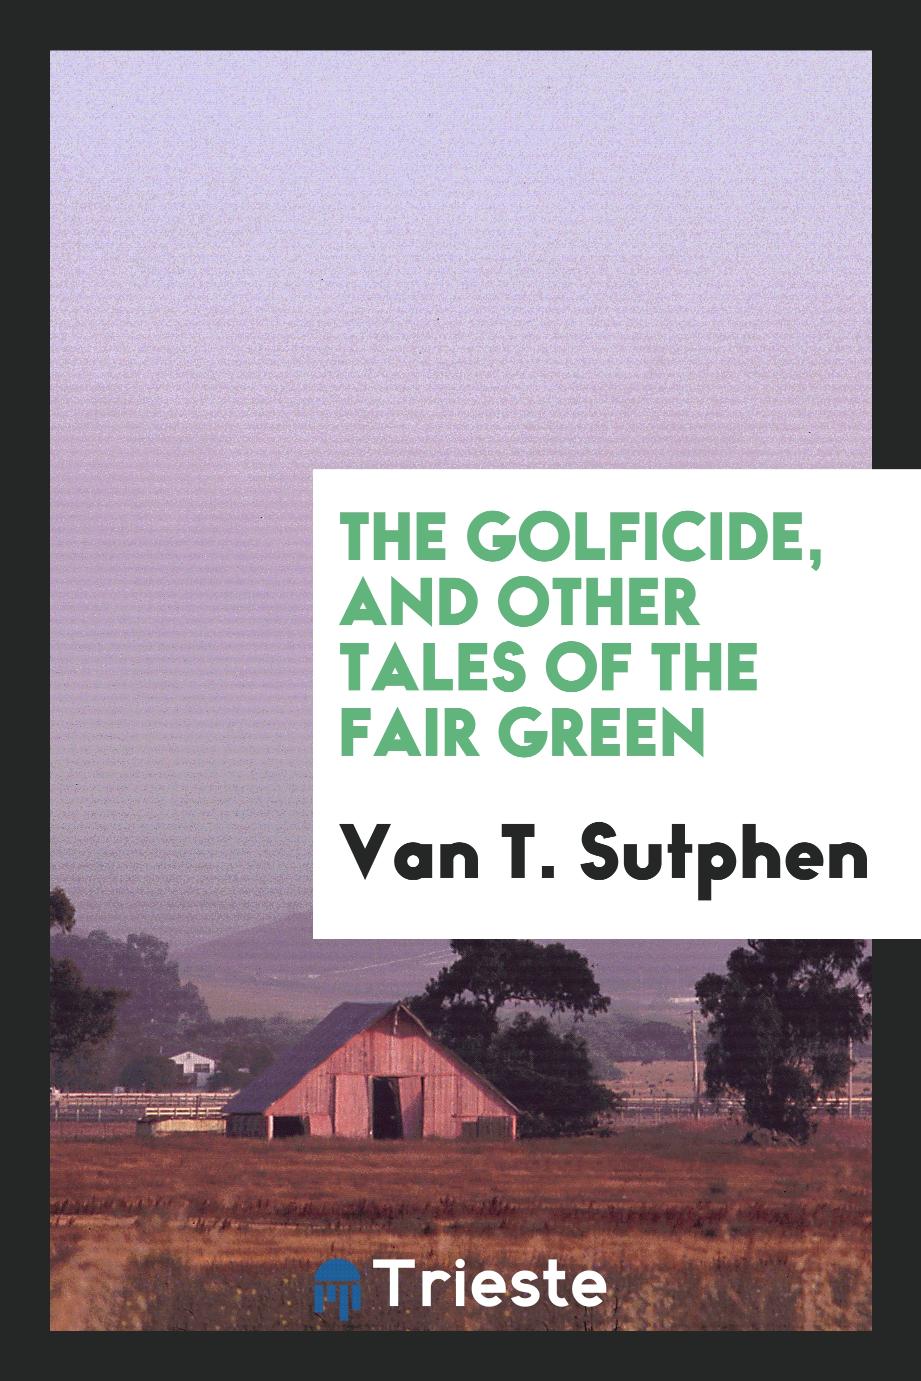 The Golficide, and Other Tales of the Fair Green